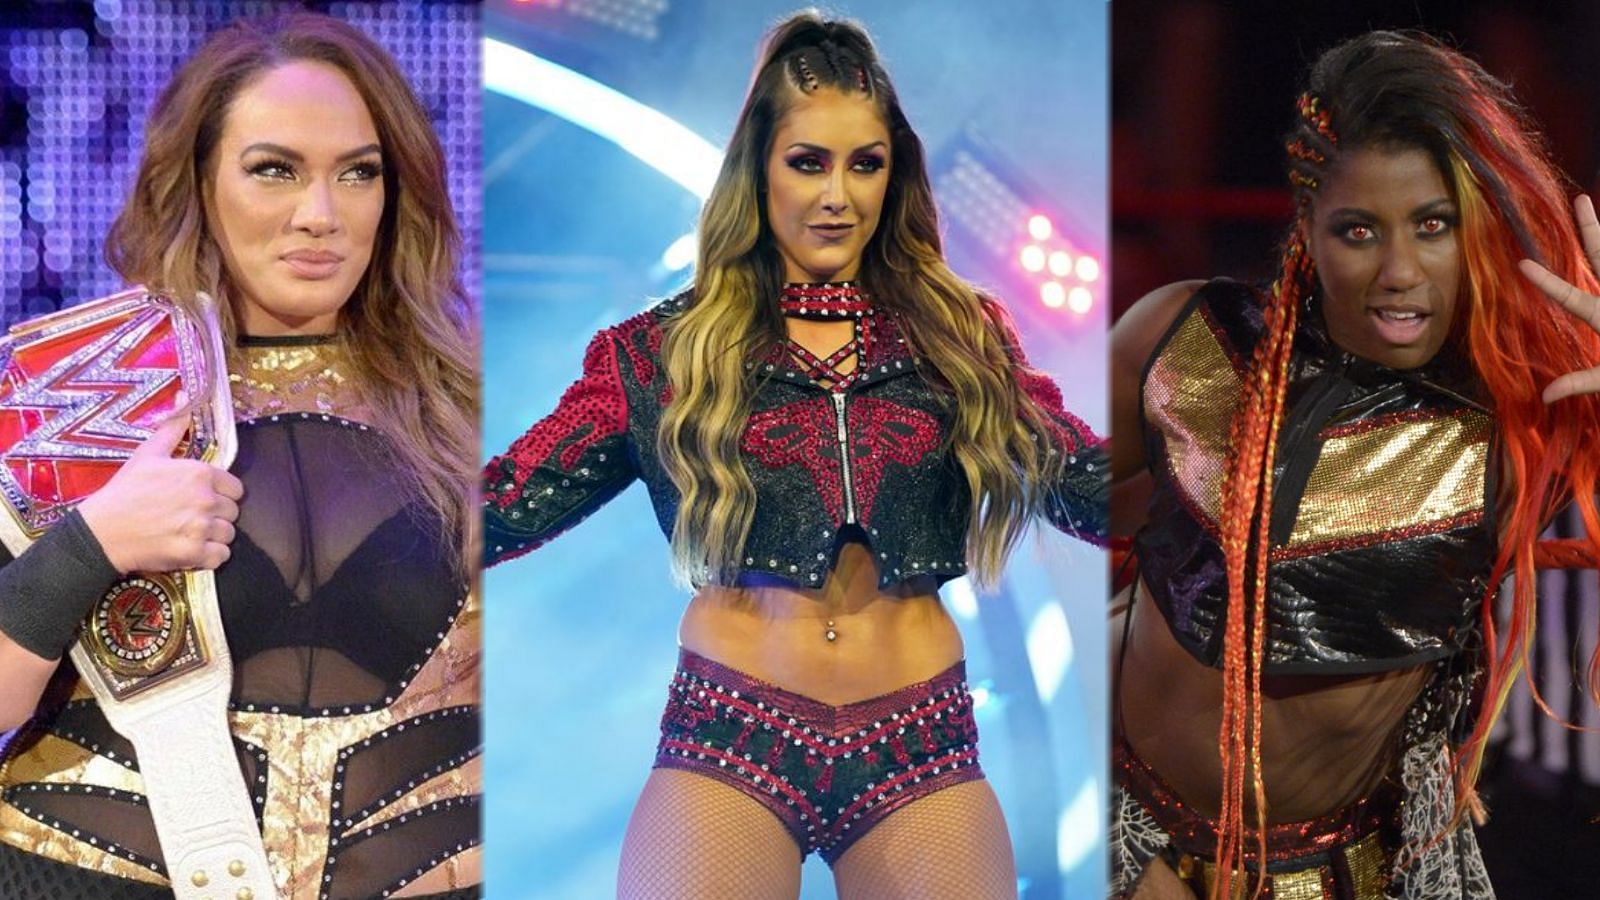 Could Britt Baker&#039;s opponent be a former WWE star making her debut?